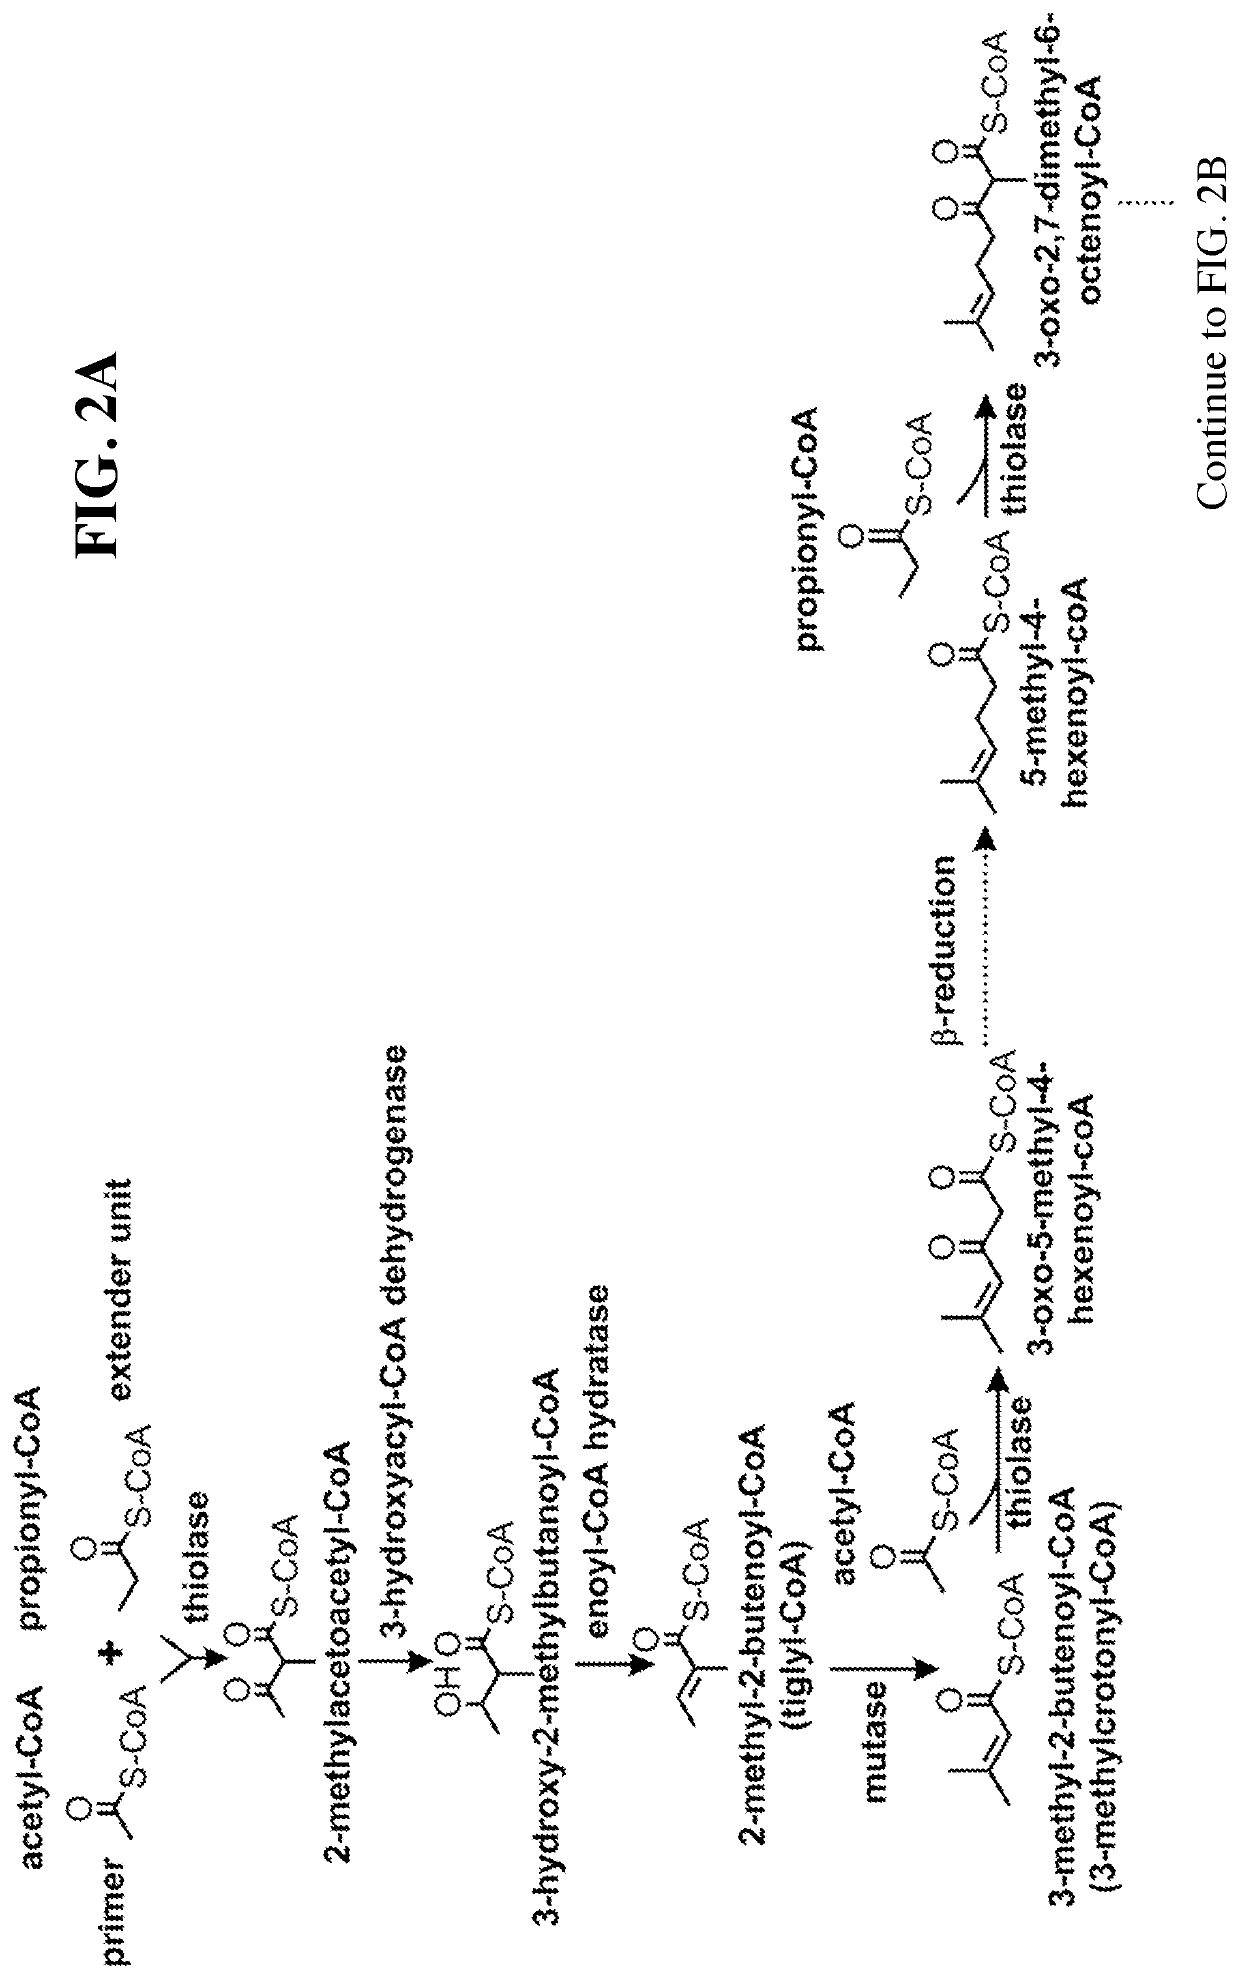 Microbial synthesis of isoprenoid precursors, isoprenoids and derivatives including prenylated aromatic compounds